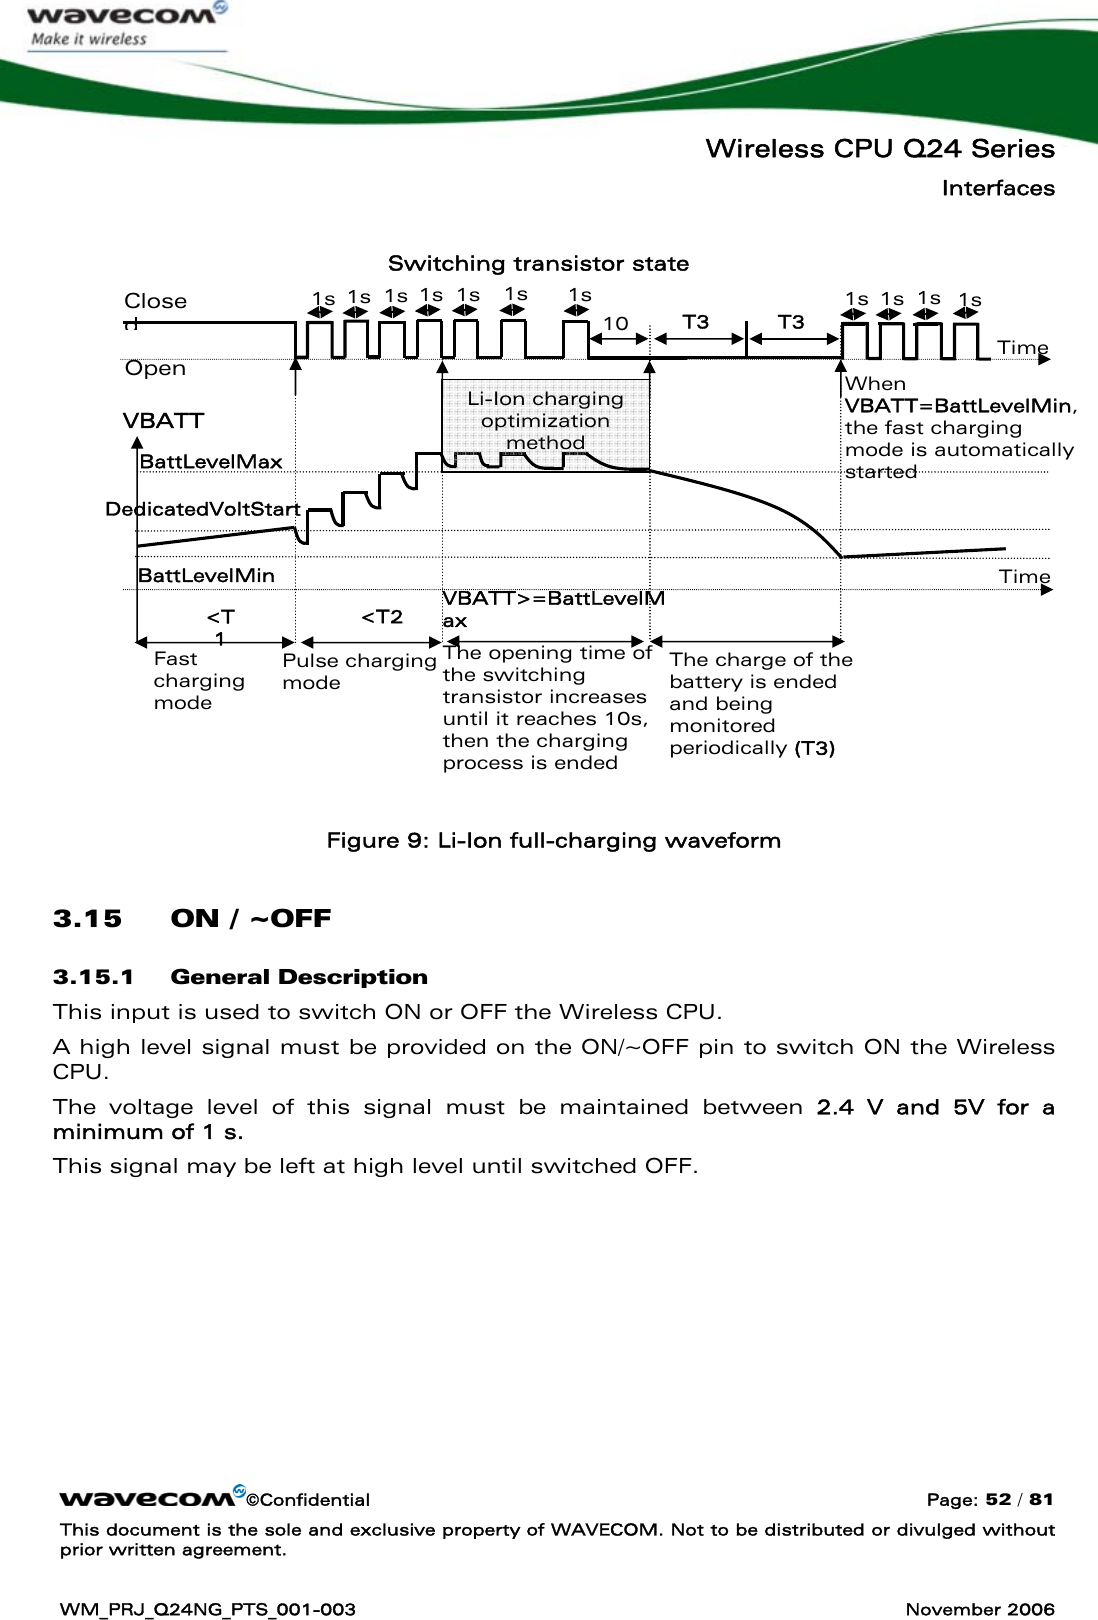   Wireless CPU Q24 Series Interfaces ©Confidential  Page: 52 / 81 This document is the sole and exclusive property of WAVECOM. Not to be distributed or divulged without prior written agreement.  WM_PRJ_Q24NG_PTS_001-003  November 2006                      Figure 9: Li-Ion full-charging waveform 3.15 ON / ~OFF 3.15.1 General Description This input is used to switch ON or OFF the Wireless CPU. A high level signal must be provided on the ON/~OFF pin to switch ON the Wireless CPU. The voltage level of this signal must be maintained between 2.4 V and 5V for a minimum of 1 s. This signal may be left at high level until switched OFF. Switching transistor state Time 1s 1s  1s 1s Pulse charging mode &lt;T1 Closed Open VBATT BattLevelMax BattLevelMin  Time Fast charging mode  DedicatedVoltStart &lt;T2 VBATT&gt;=BattLevelMax  The opening time of the switching transistor increases until it reaches 10s, then the charging process is ended 10 The charge of the battery is ended and being monitored periodically (T3) T3  T3 When VBATT=BattLevelMin, the fast charging mode is automatically started   1s 1s 1s  1s 1s 1s  1s Li-Ion charging optimization method 